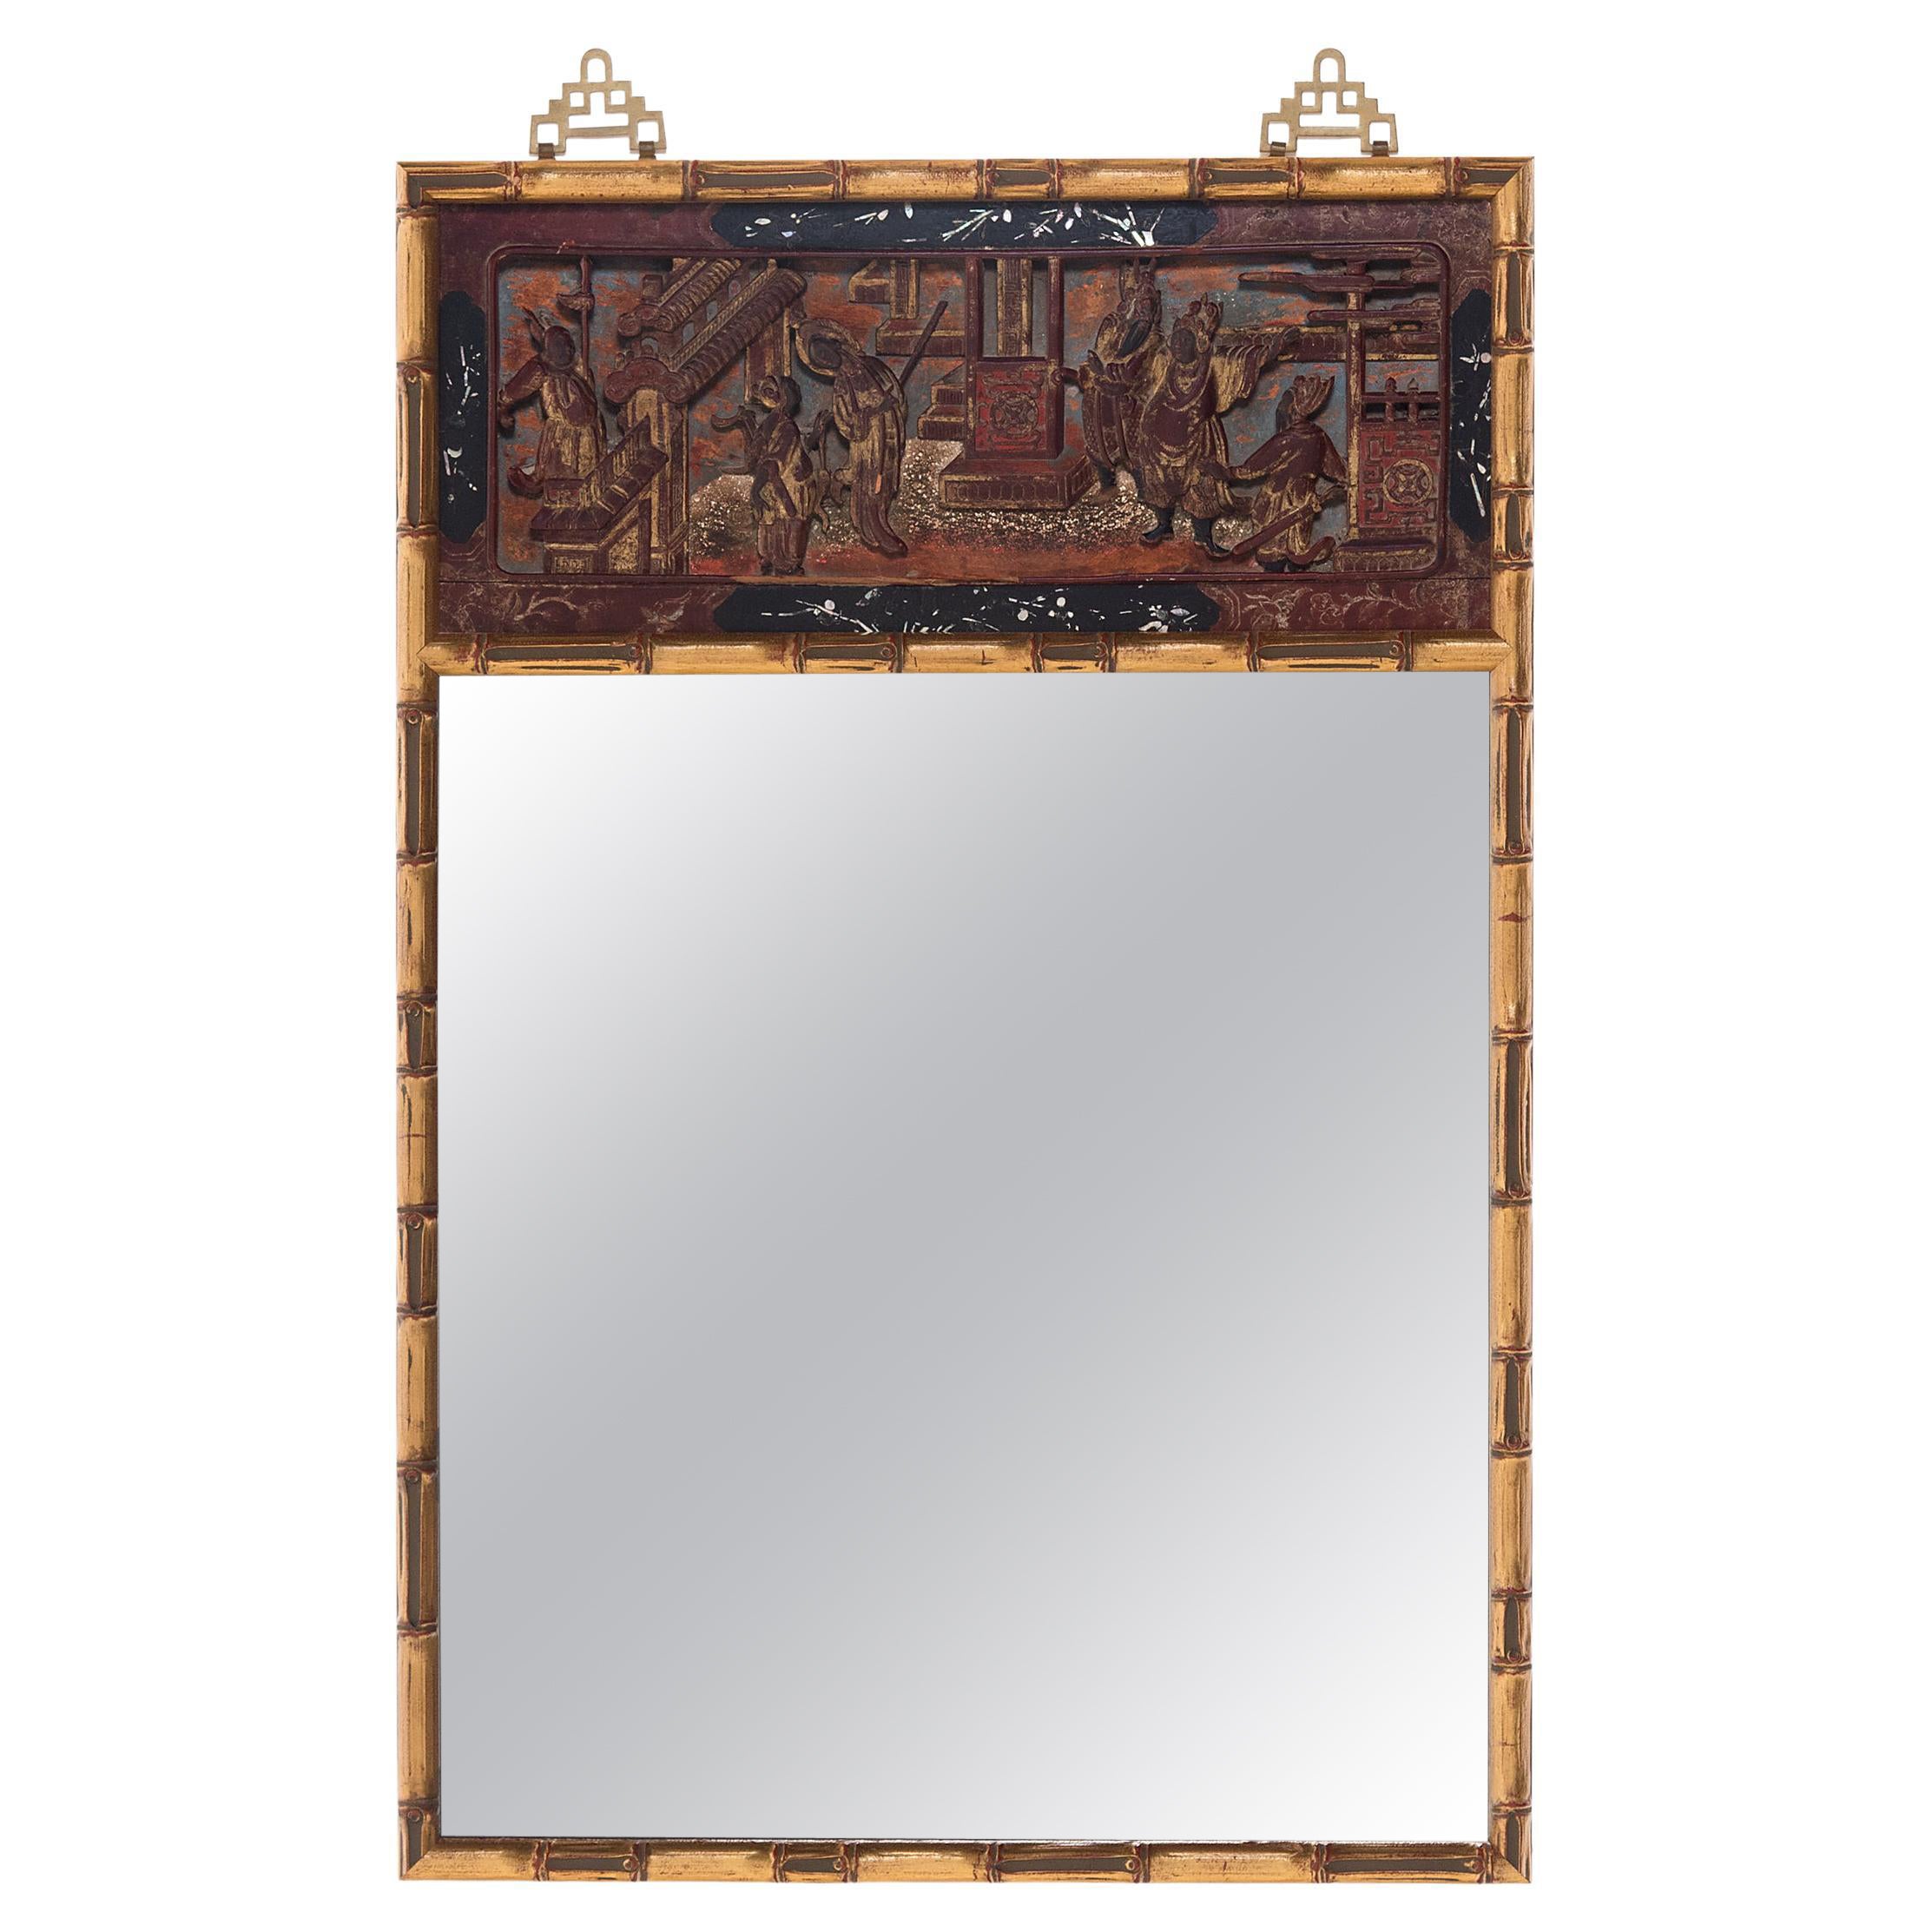 Faux-Bamboo Wall Mirror with Chinese Carved Panel